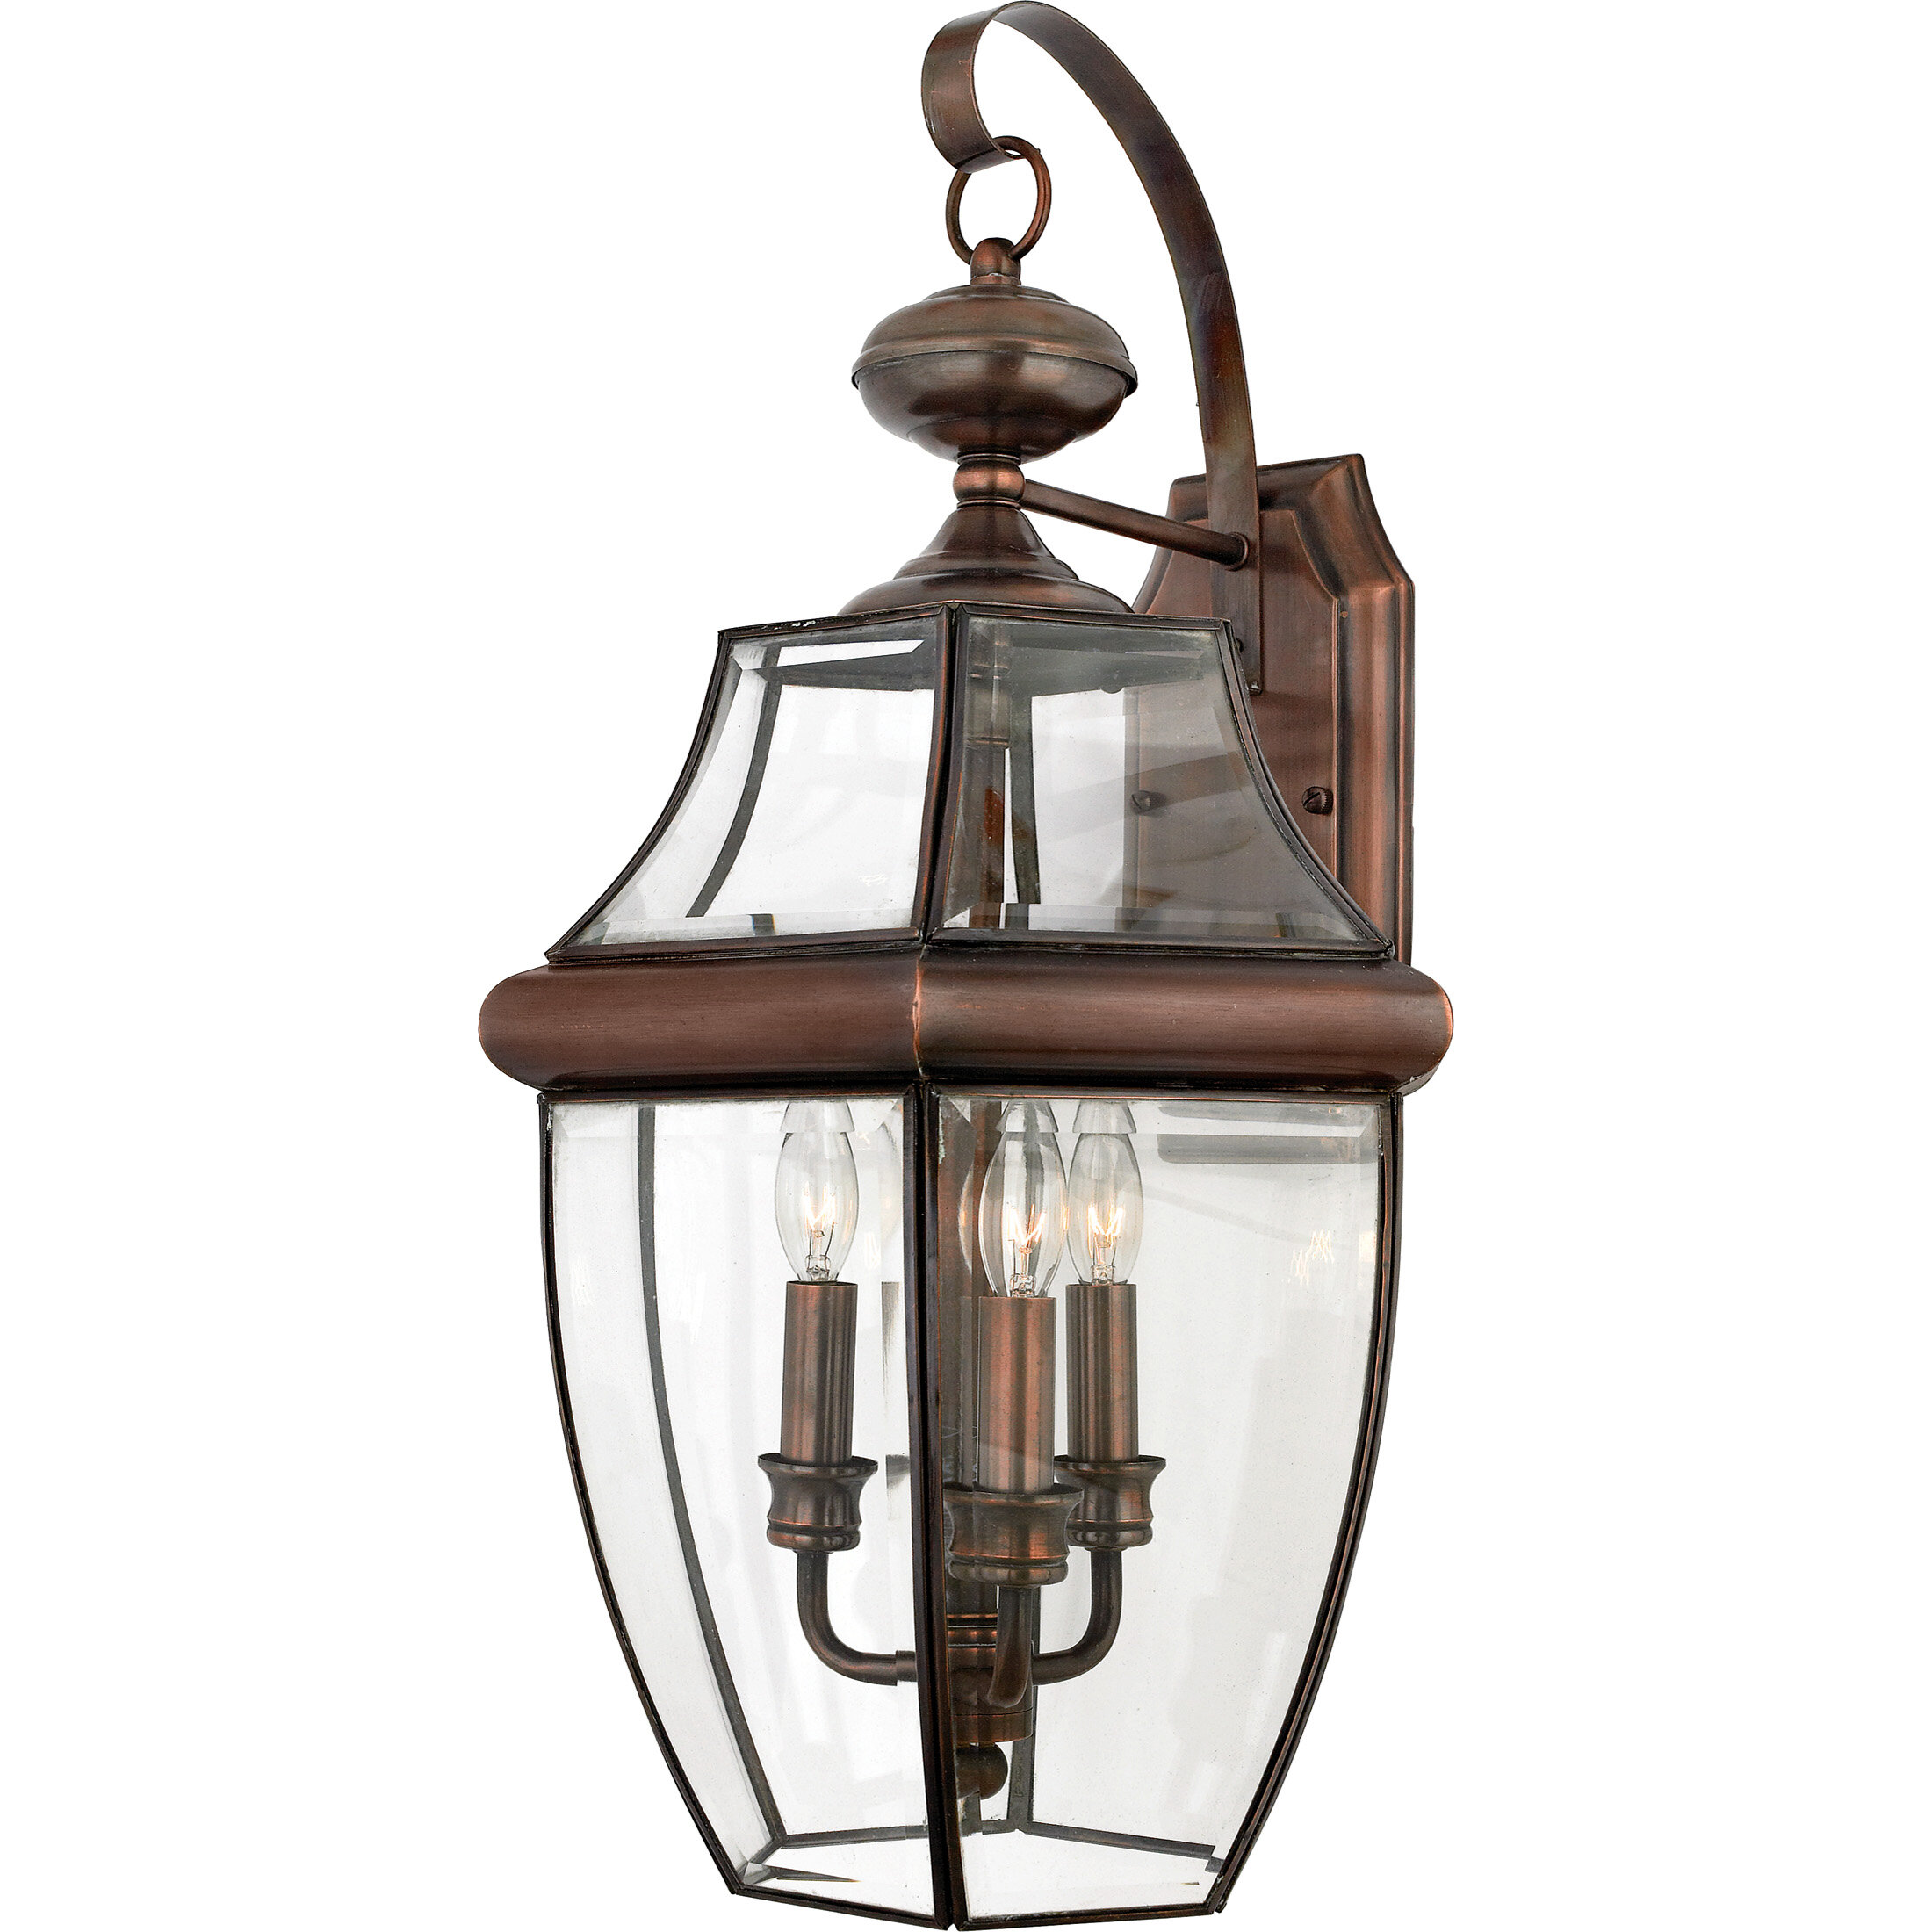 Details about   Vintage Cast Metal Lantern Style Wall Sconce 